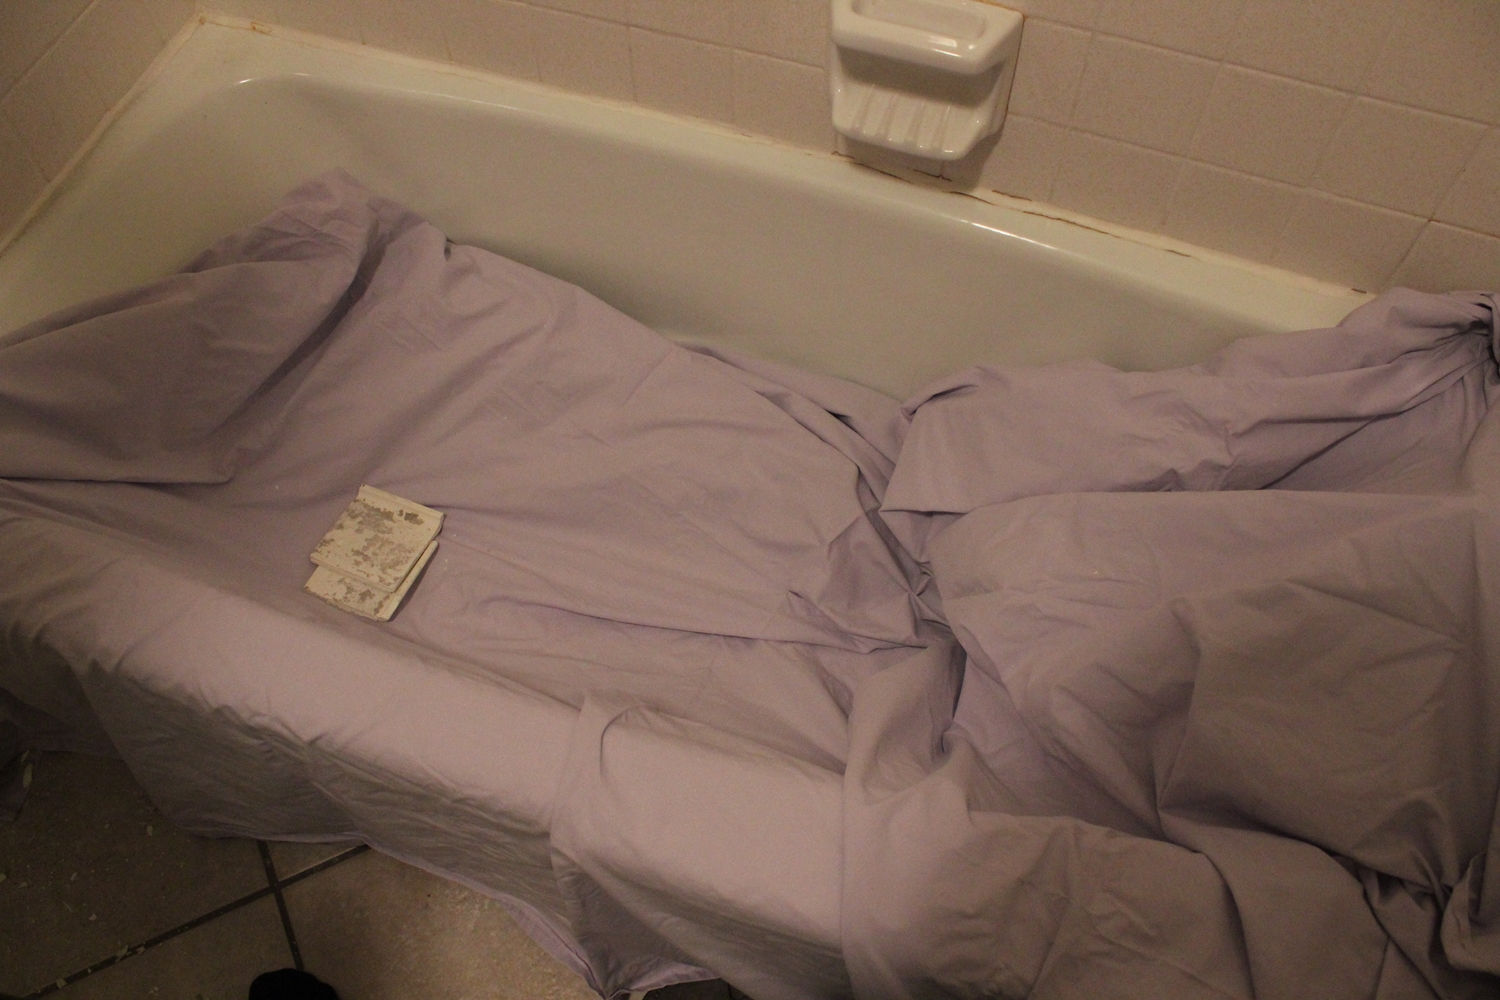 Lay an old drop cloth or sheet in the tub itself